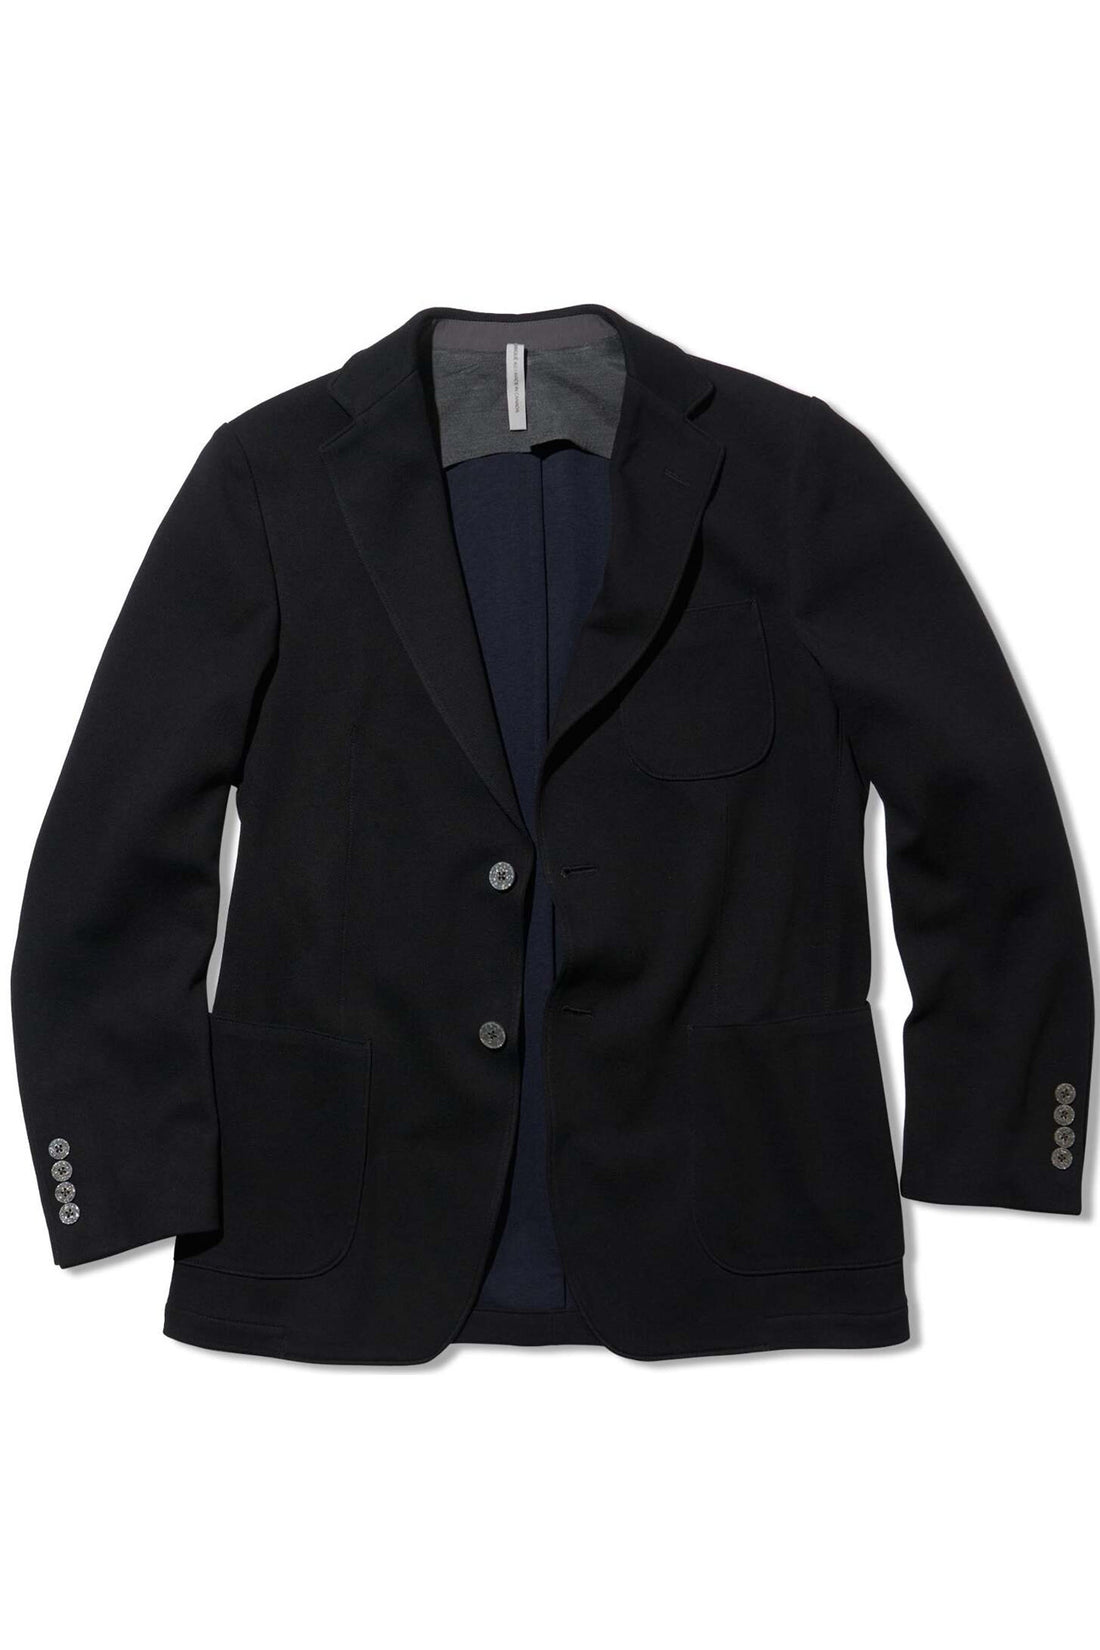 Black & Navy Double Faced Pique Knit Jacket